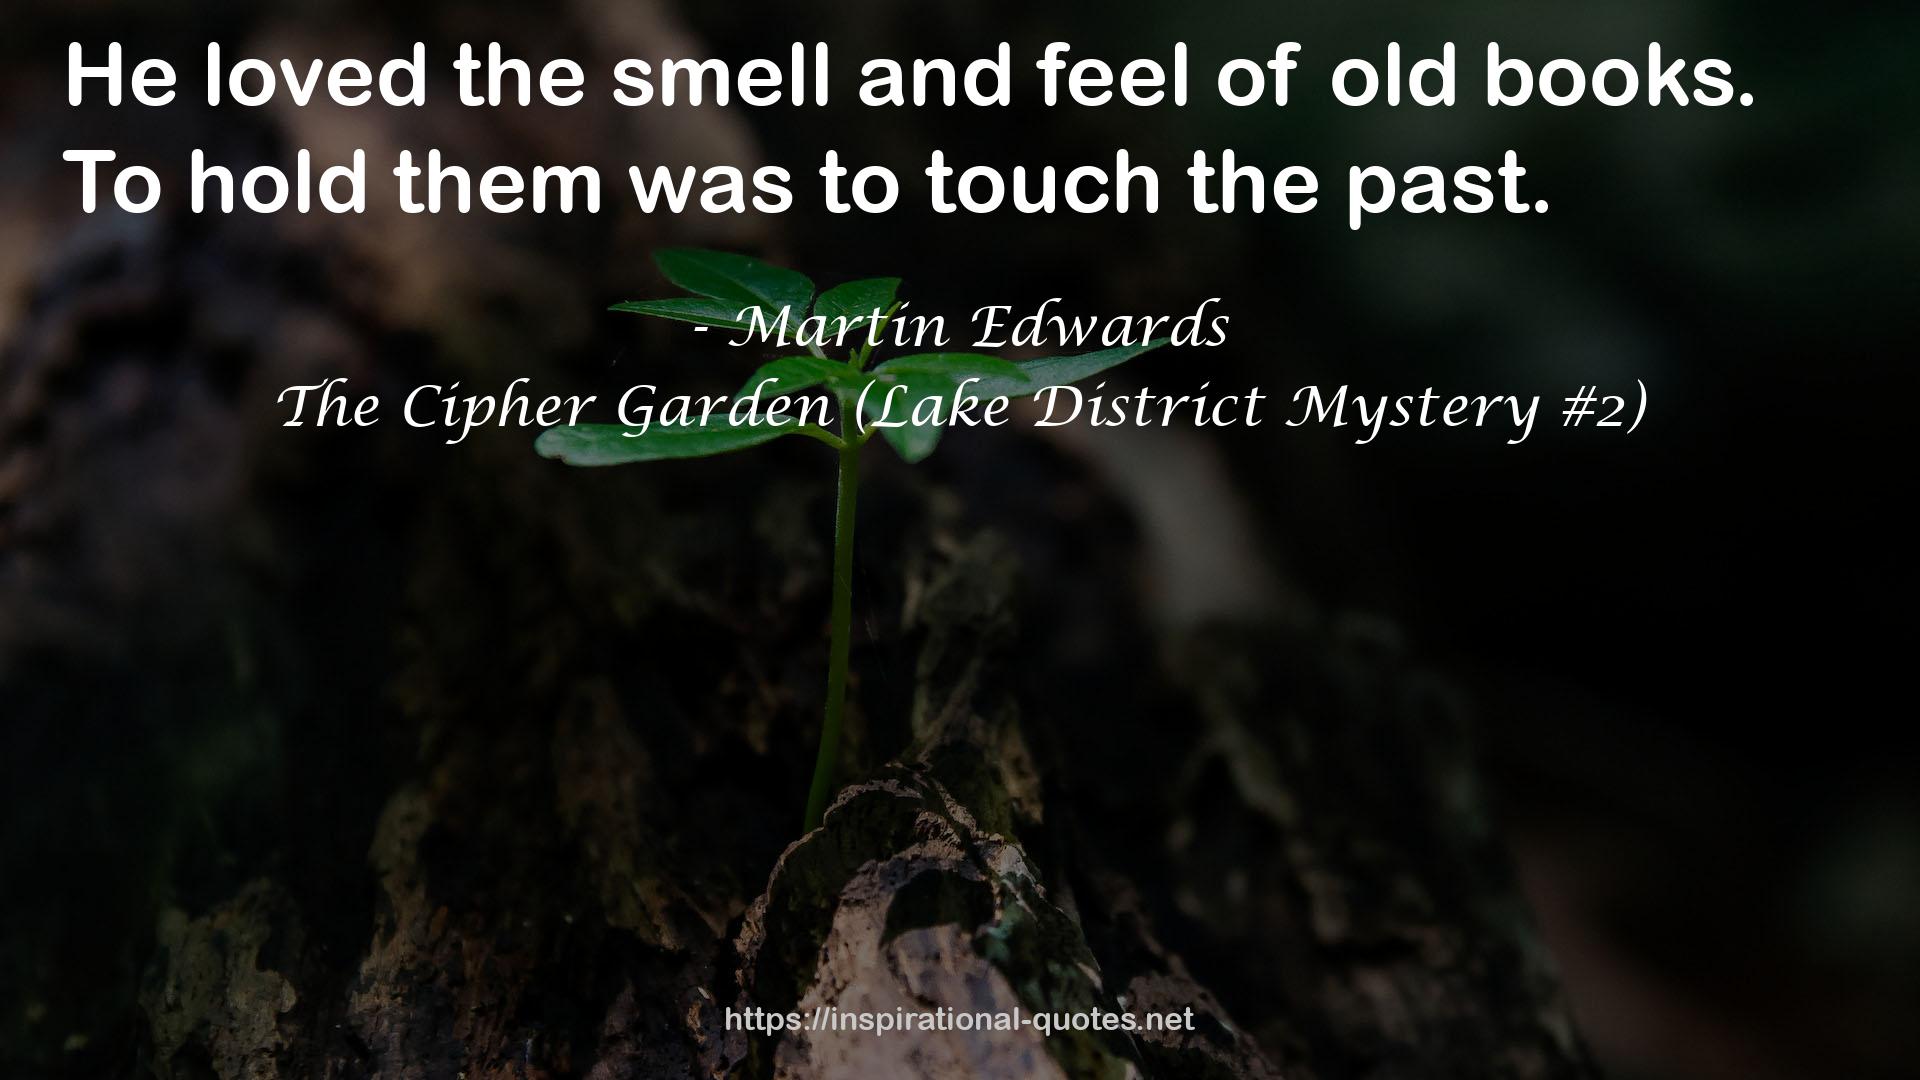 The Cipher Garden (Lake District Mystery #2) QUOTES